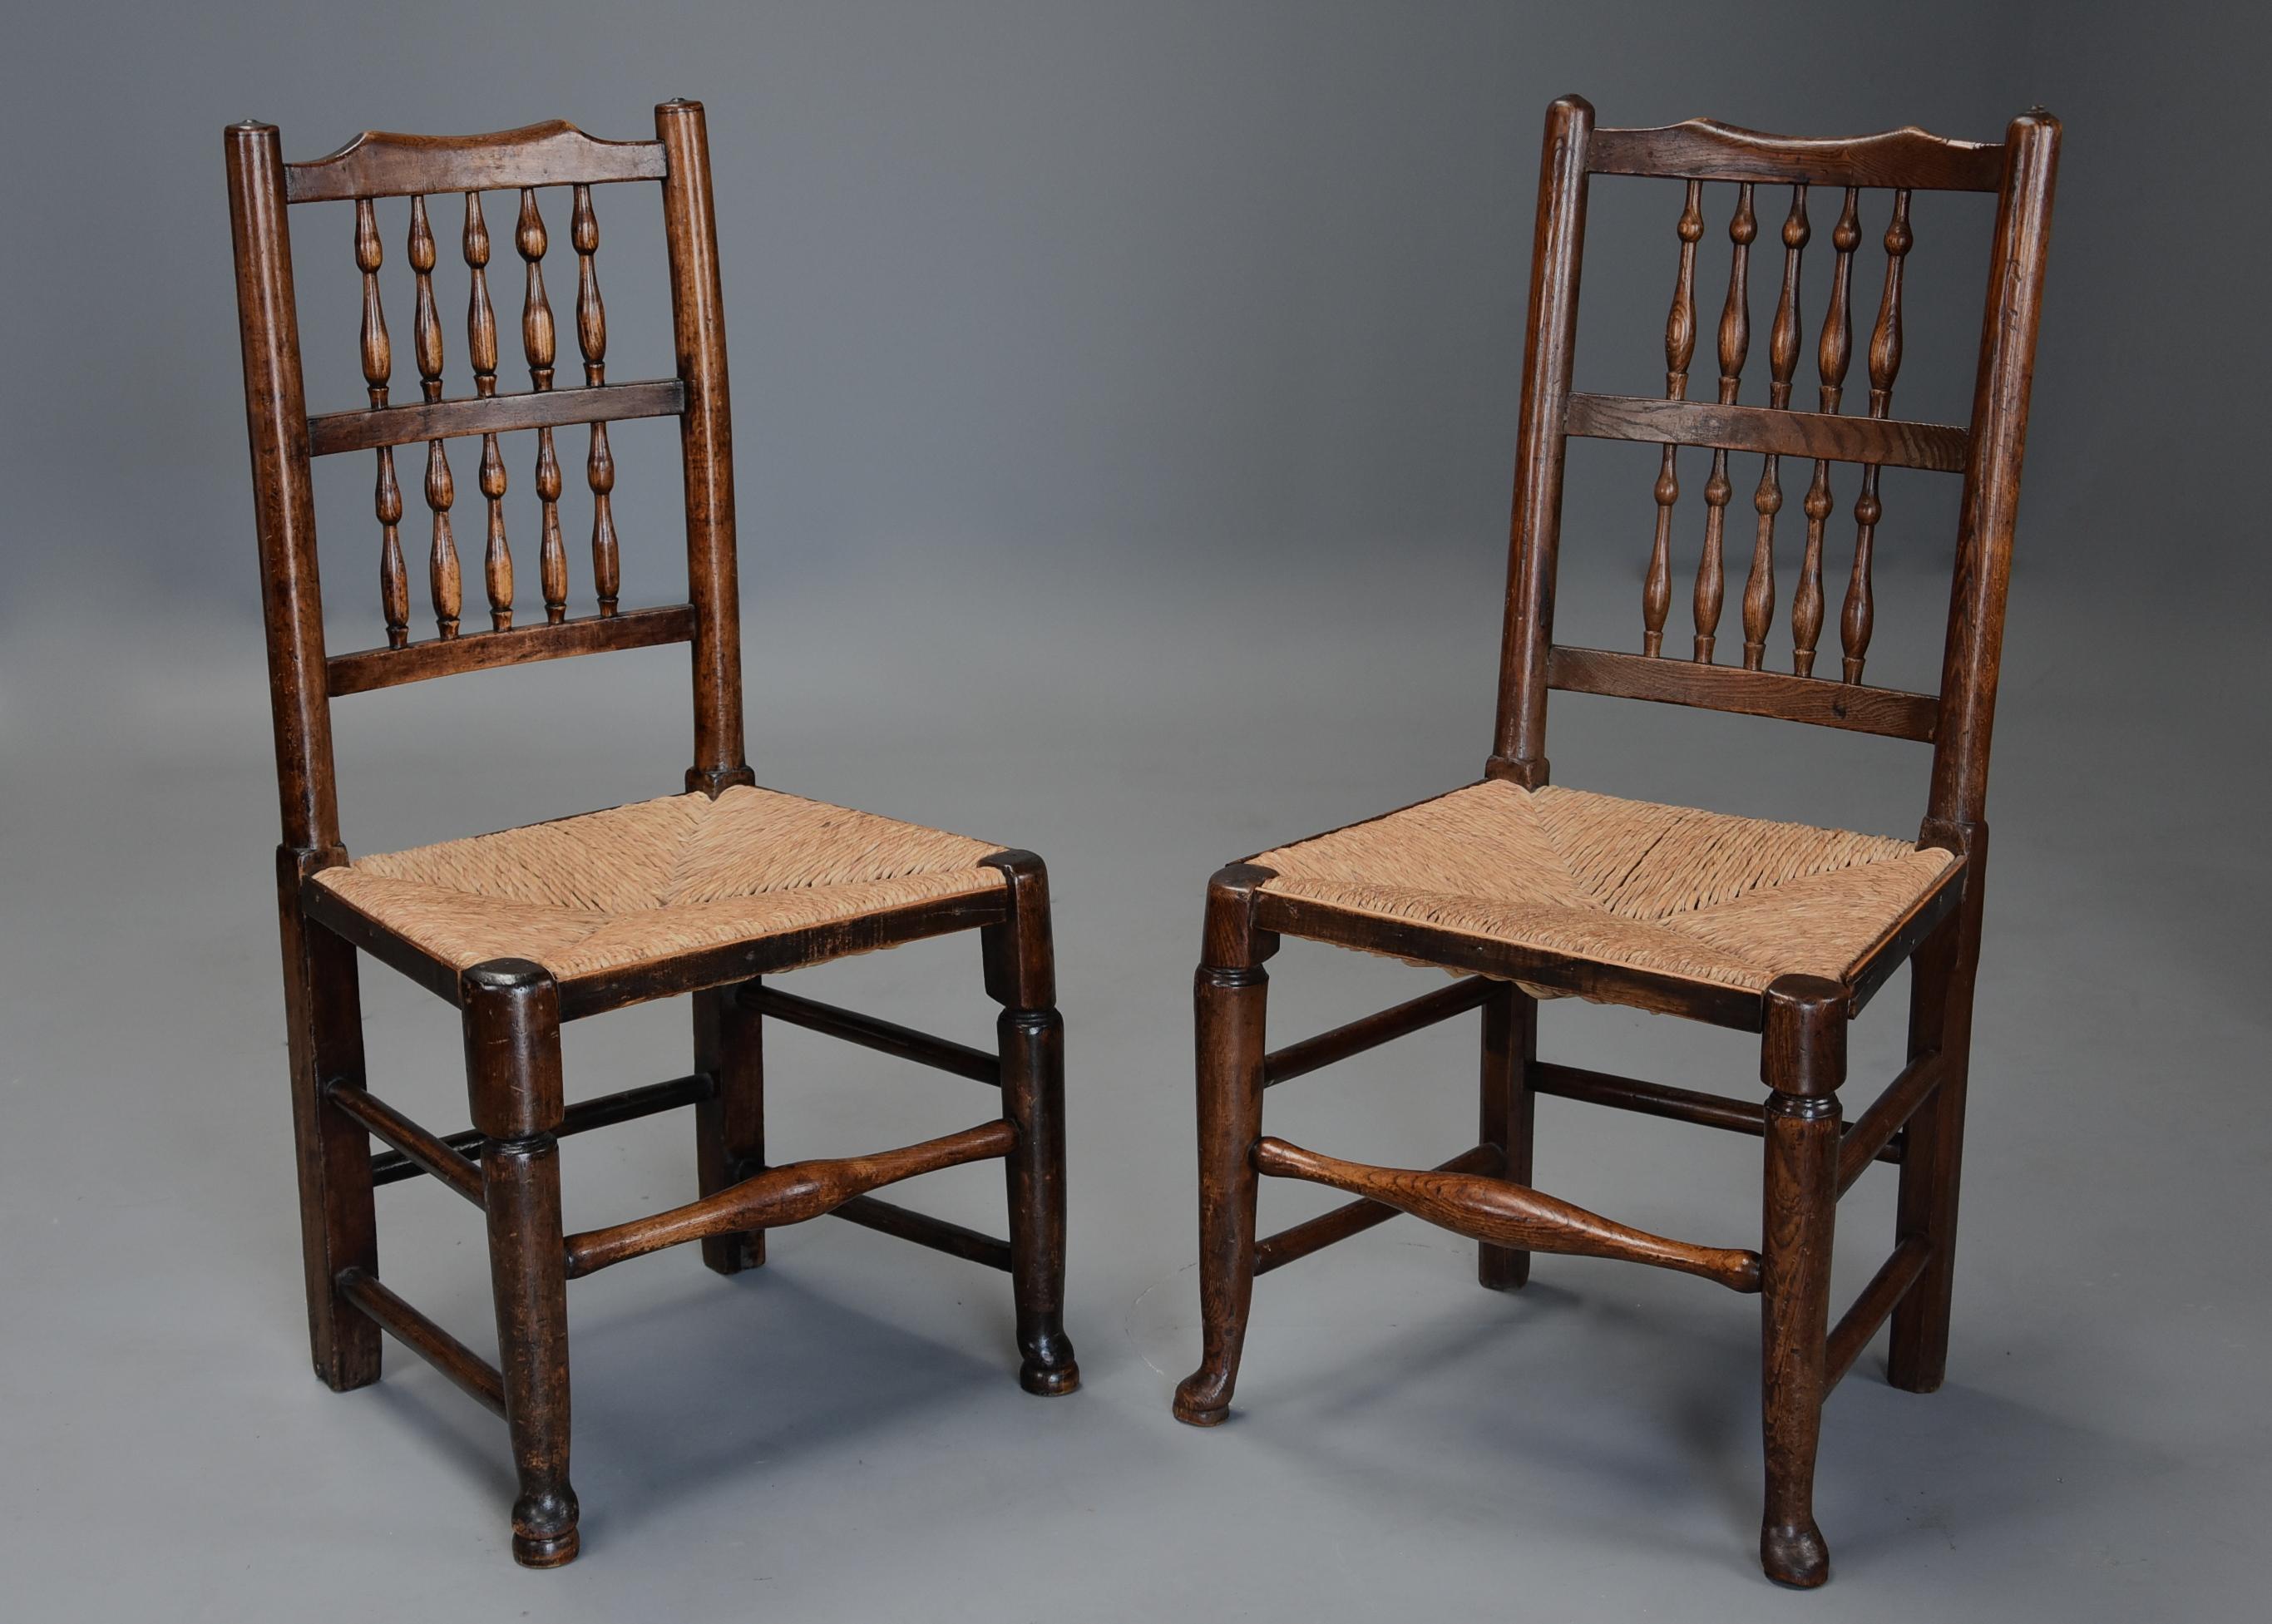 Matched Set of Eight Mid-19th Century Ash Spindle Back Chairs of Superb Patina For Sale 2